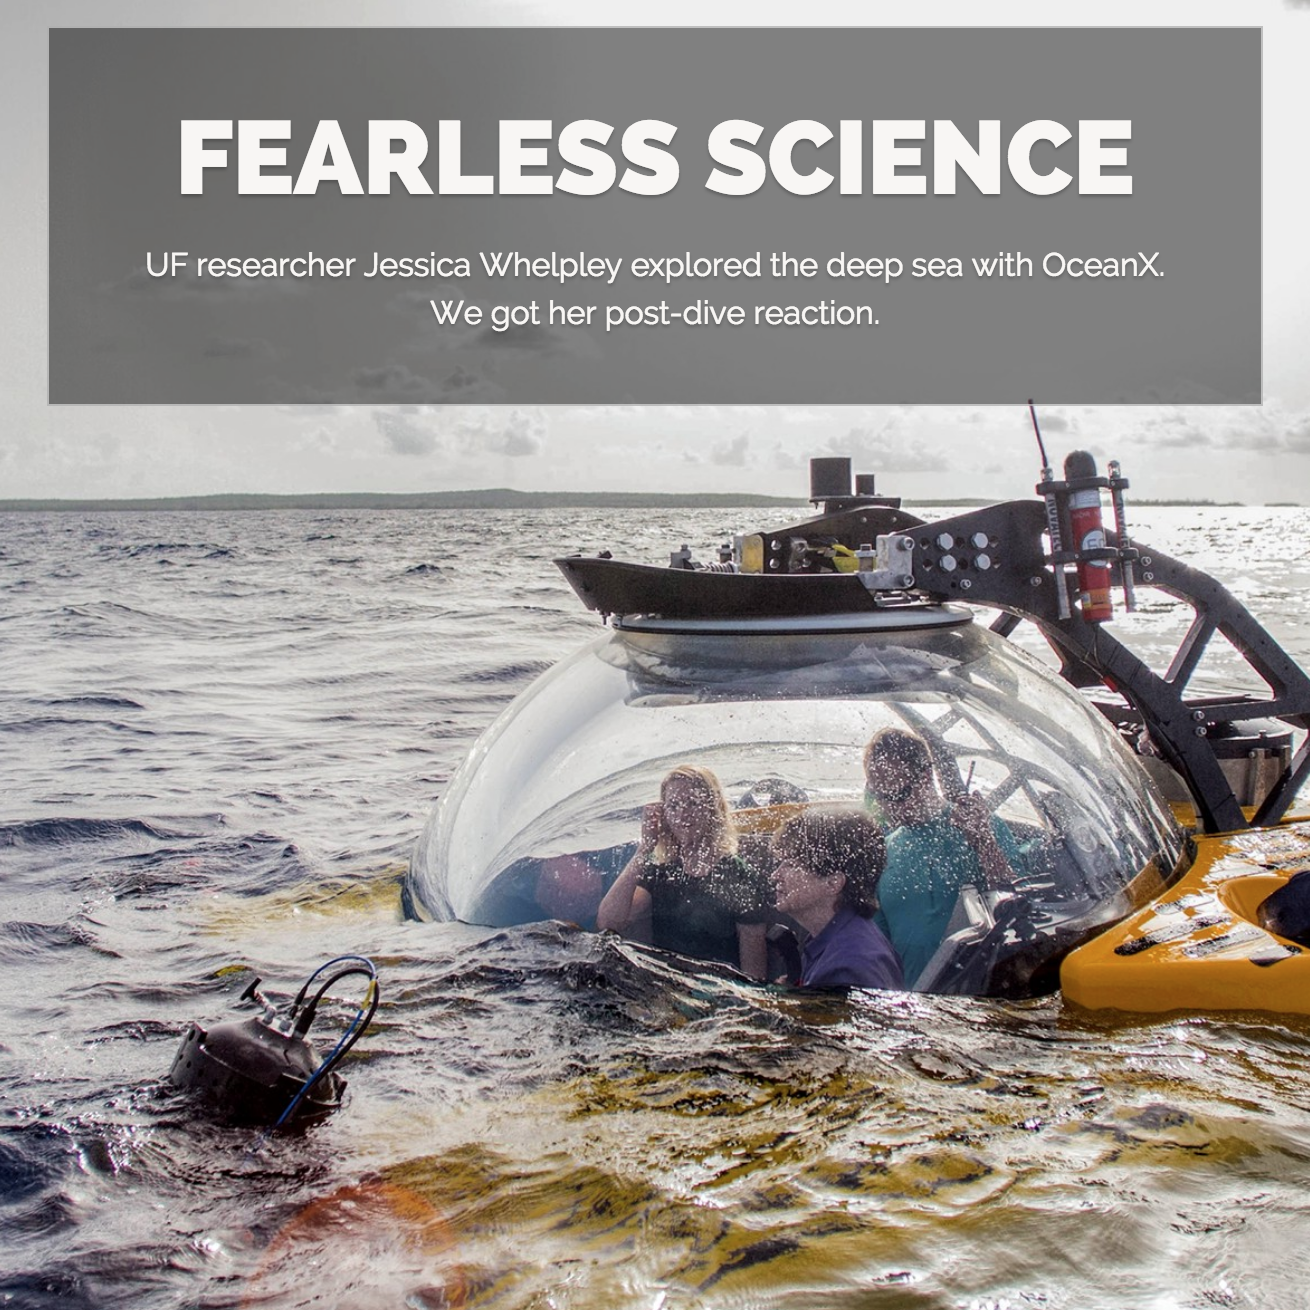 Jessica Whelpley Featured in Fearless Science Article